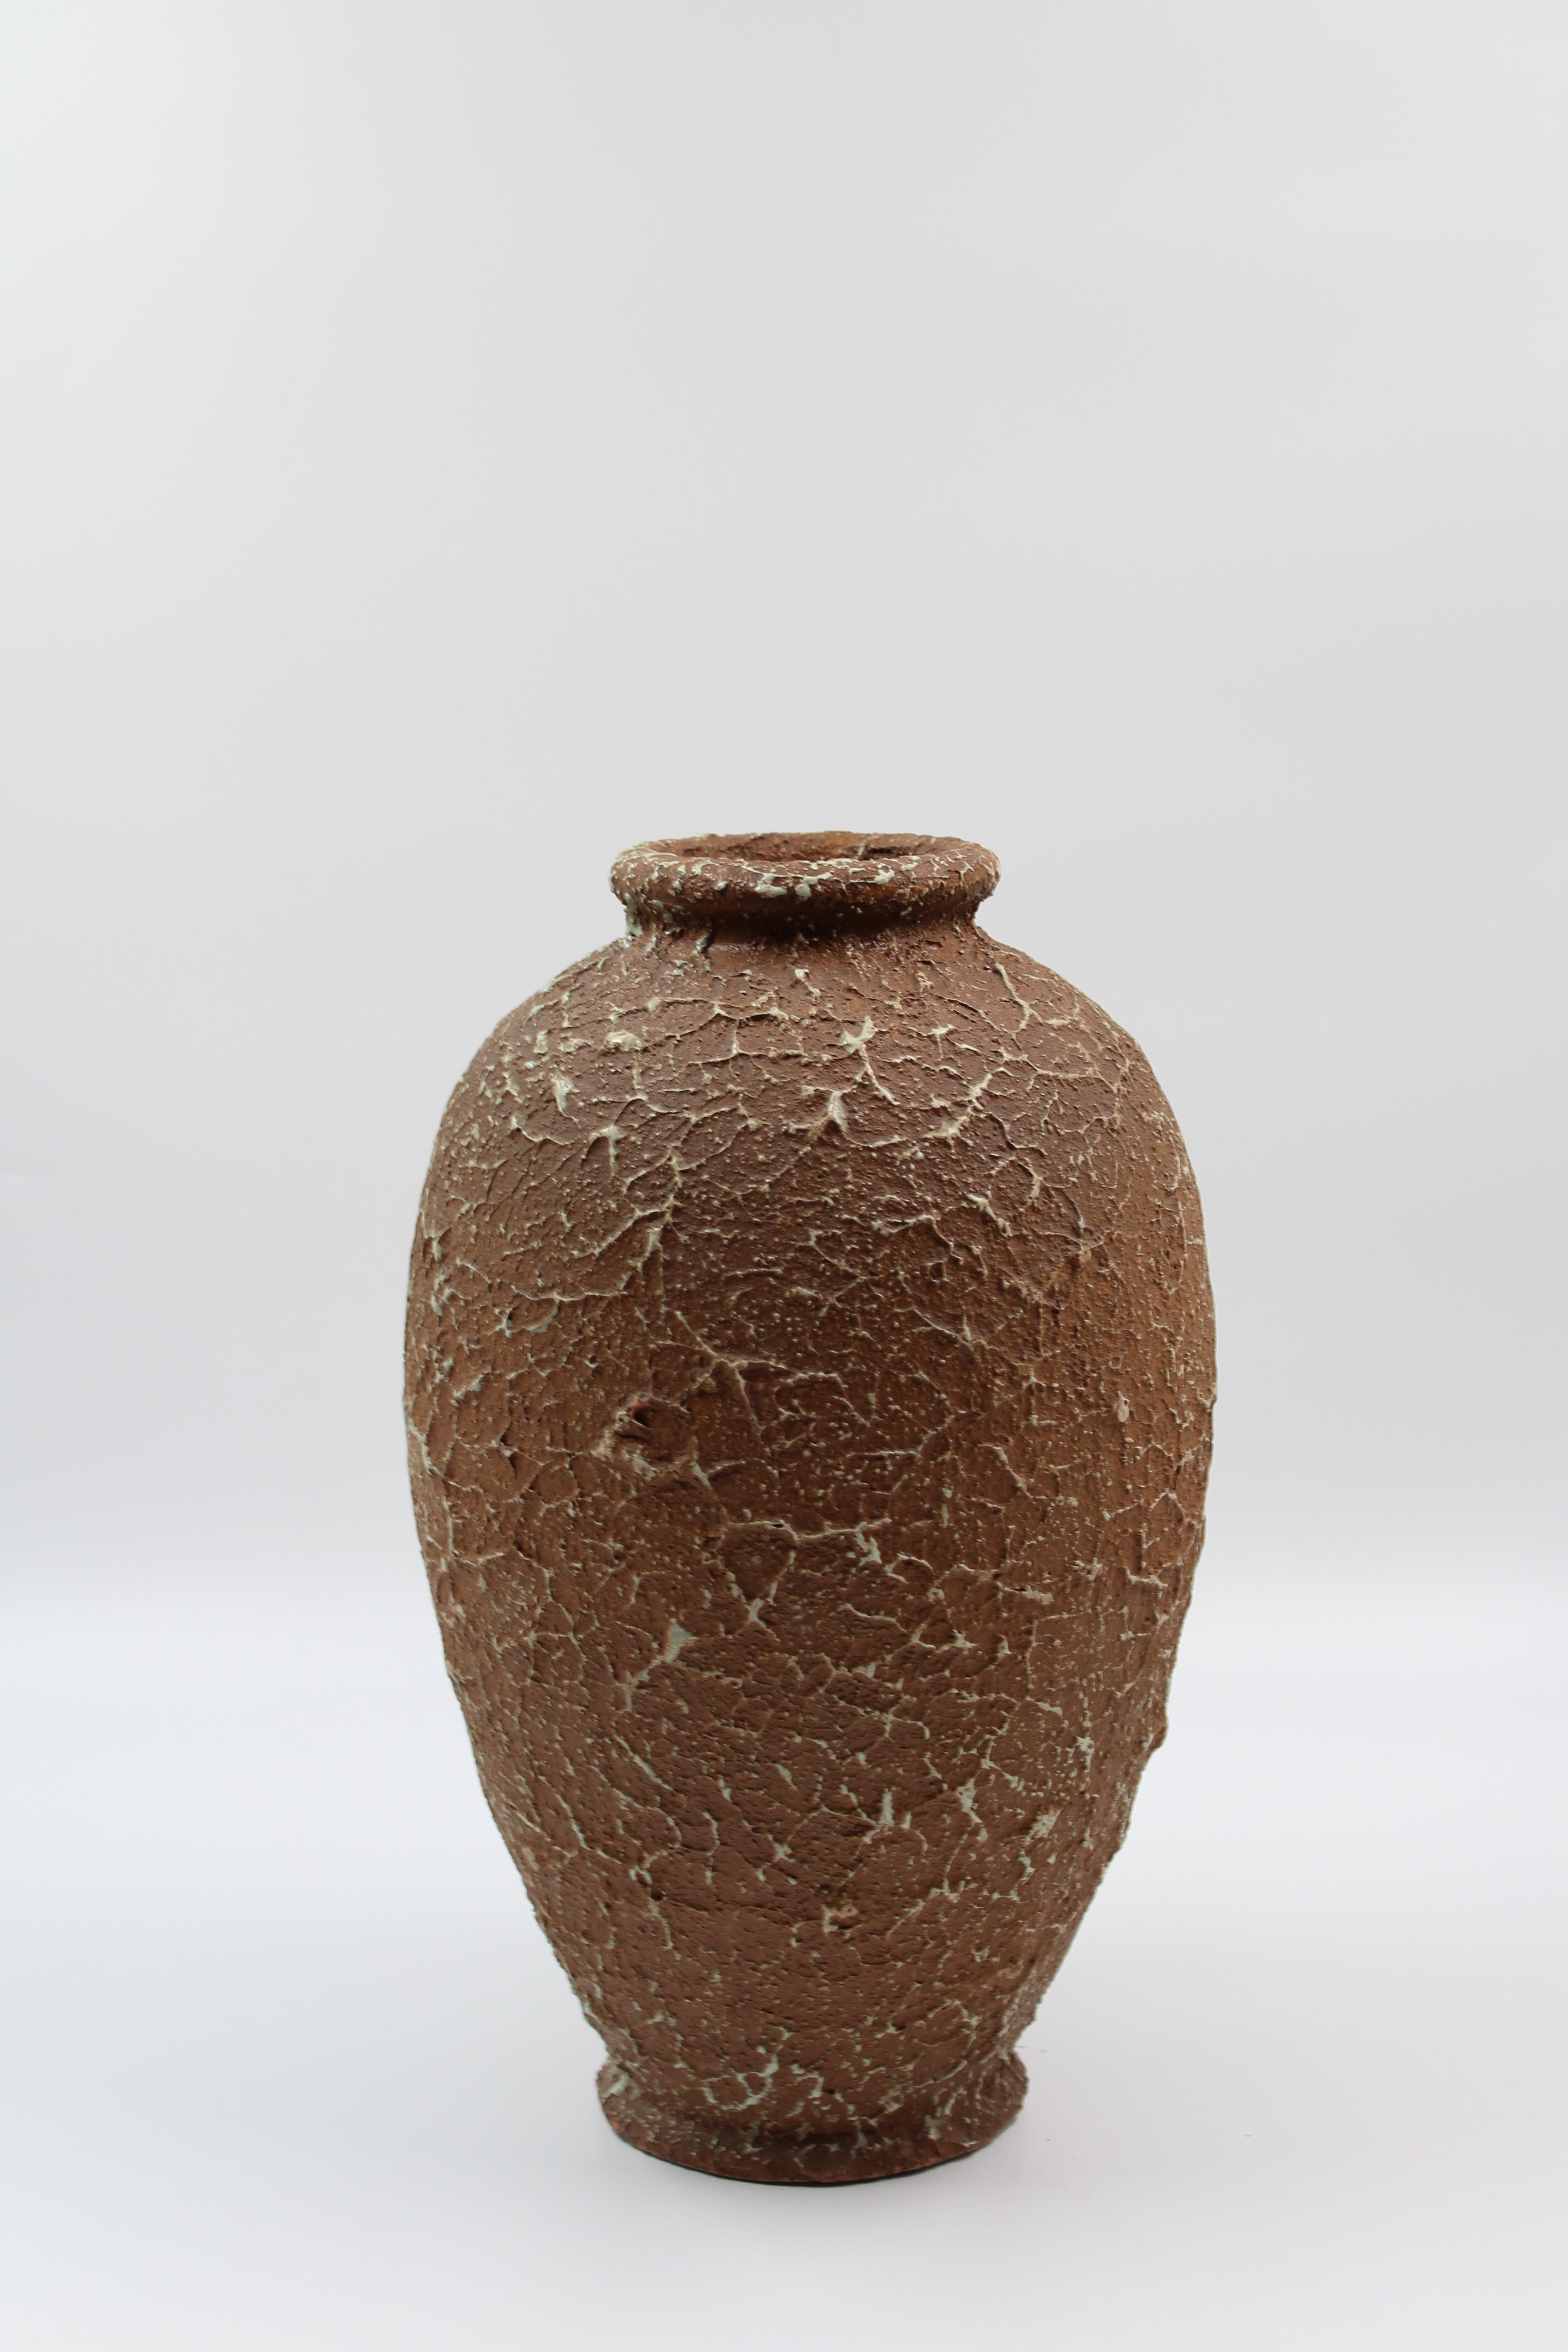 A ceramic vase, made with the chamotte technique, by the Swedish company Andersson & Johansson at Höganäs Keramik. The stamp dates the vase to between 1920 and 1958. Beautiful and very decorative object in very good vintage condition.